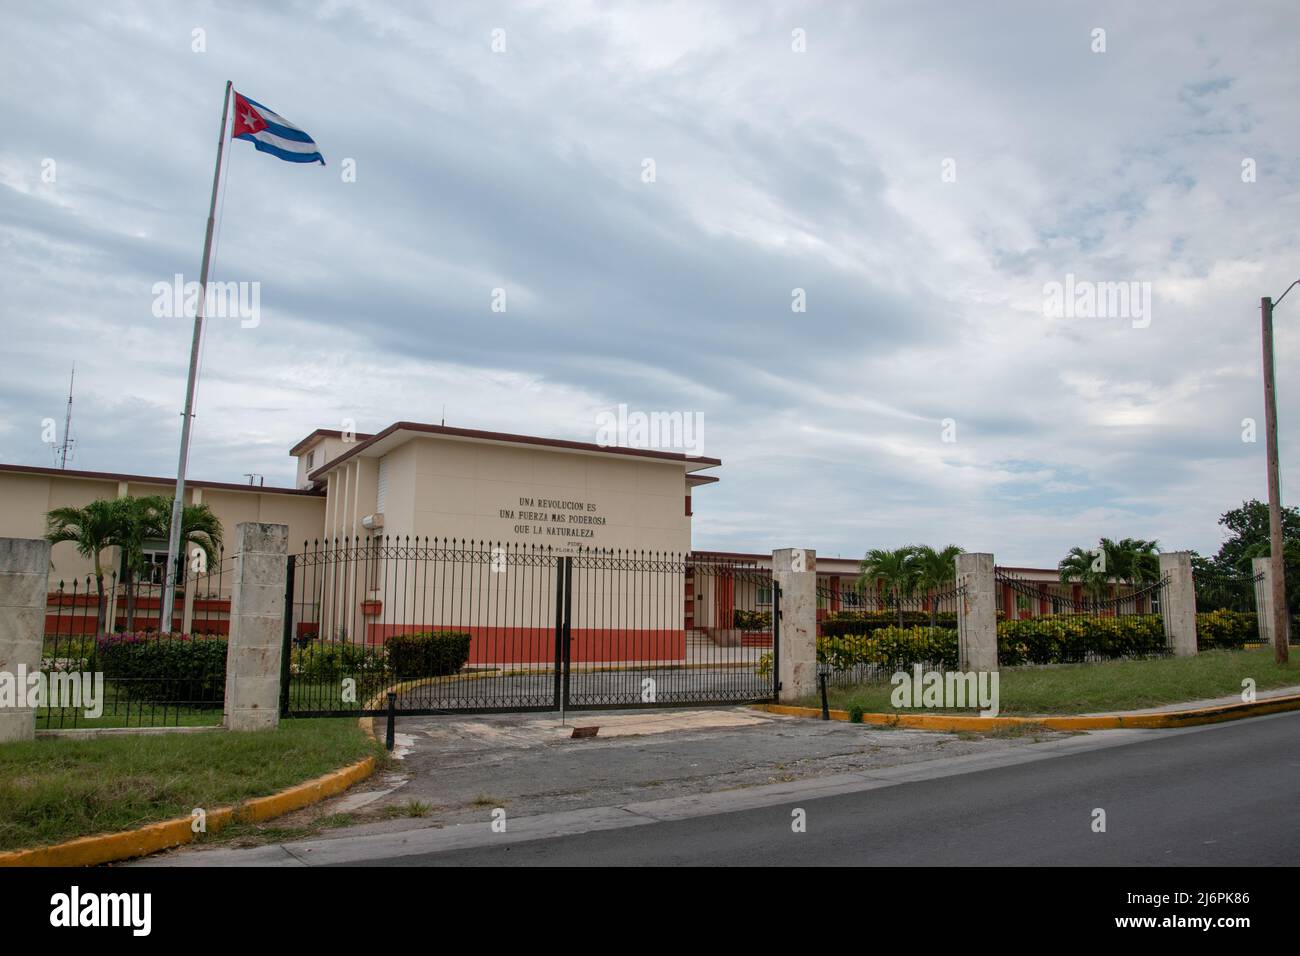 Instituto de Meteorología de Casa Blanca with the quote 'a revolution is a force more powerful than nature' by Castro on the building. Casablanca, Hav Stock Photo